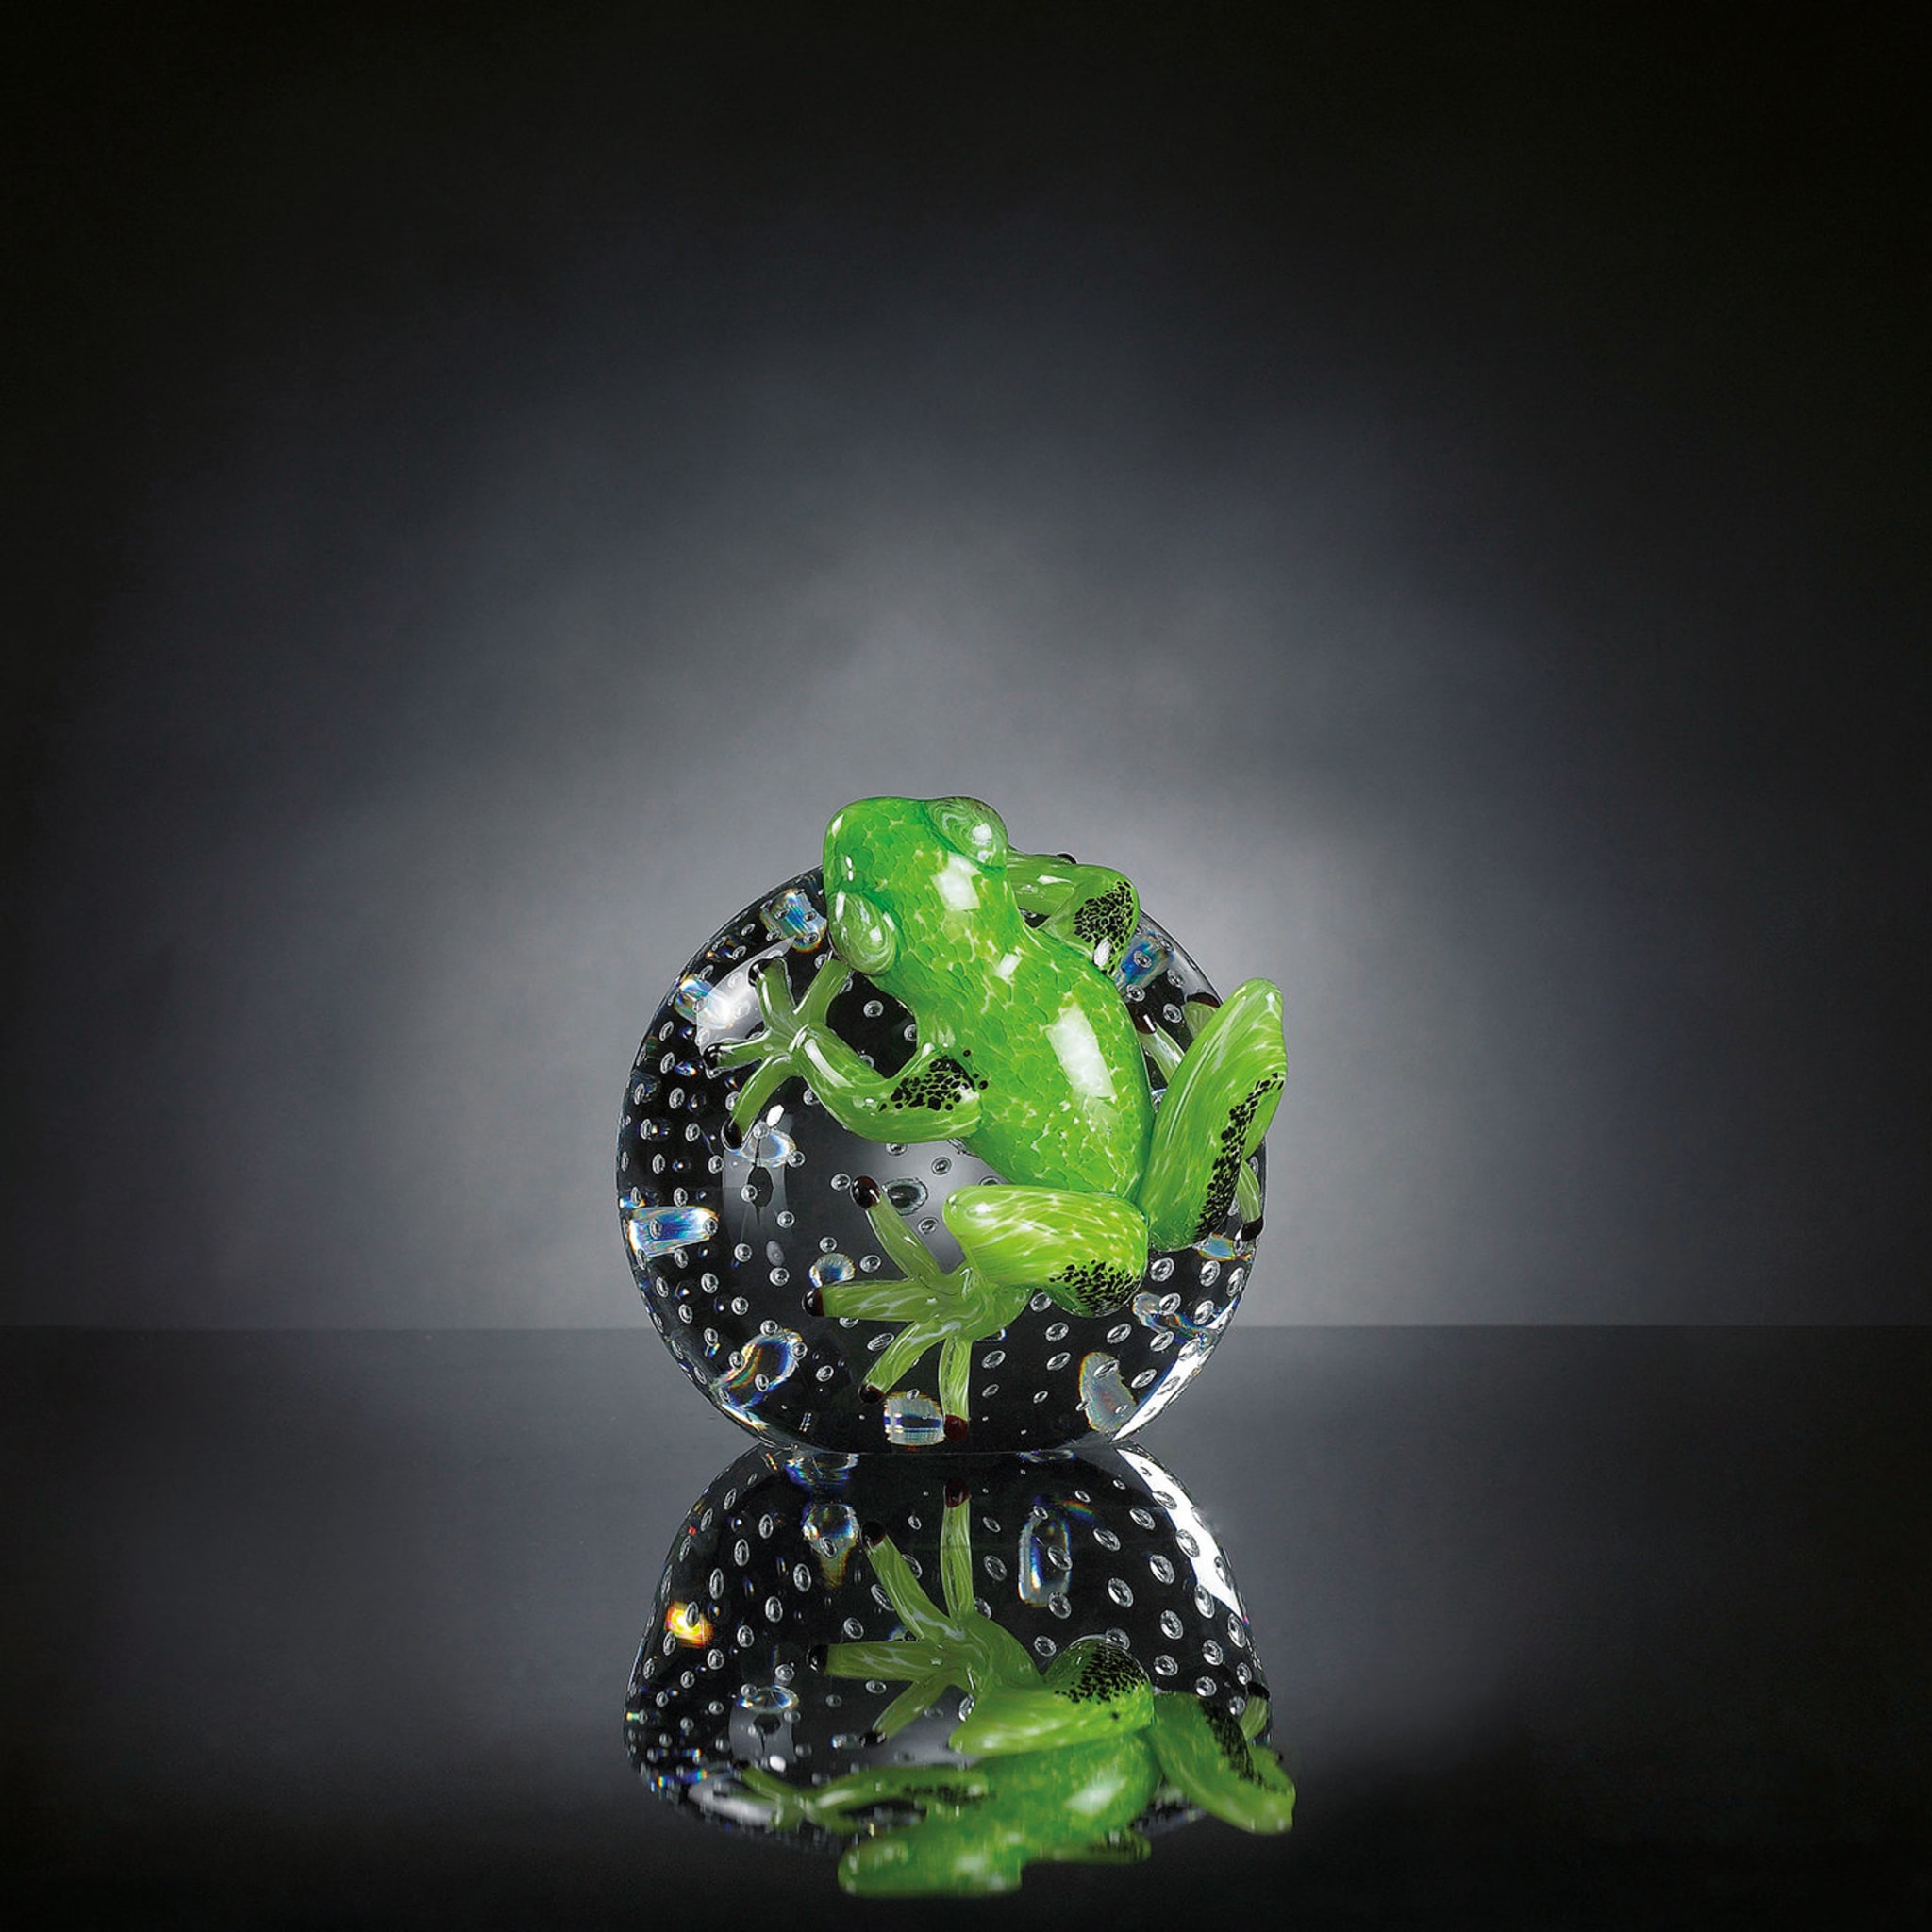 Green Glass Frog On Sphere  - Alternative view 1